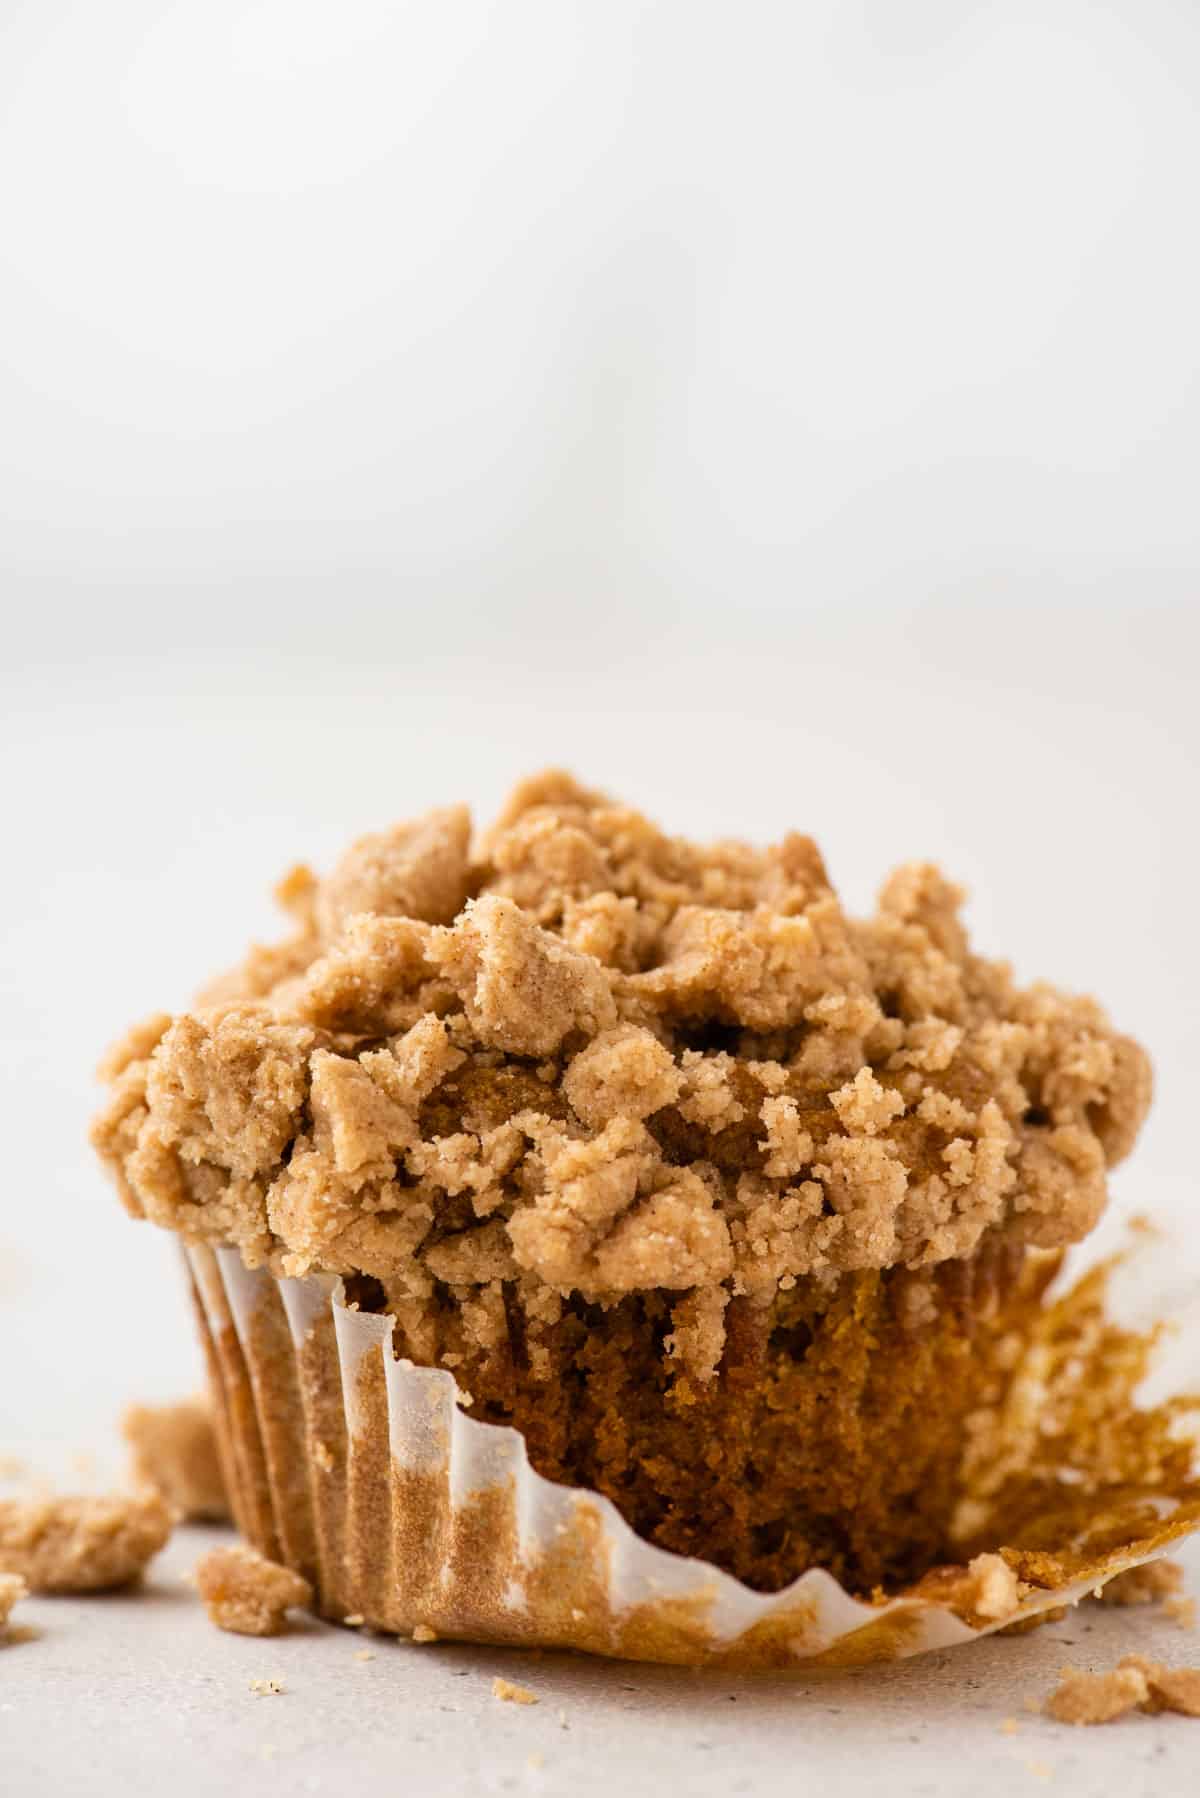 a single gluten free pumpkin muffin with liner half removed on white background